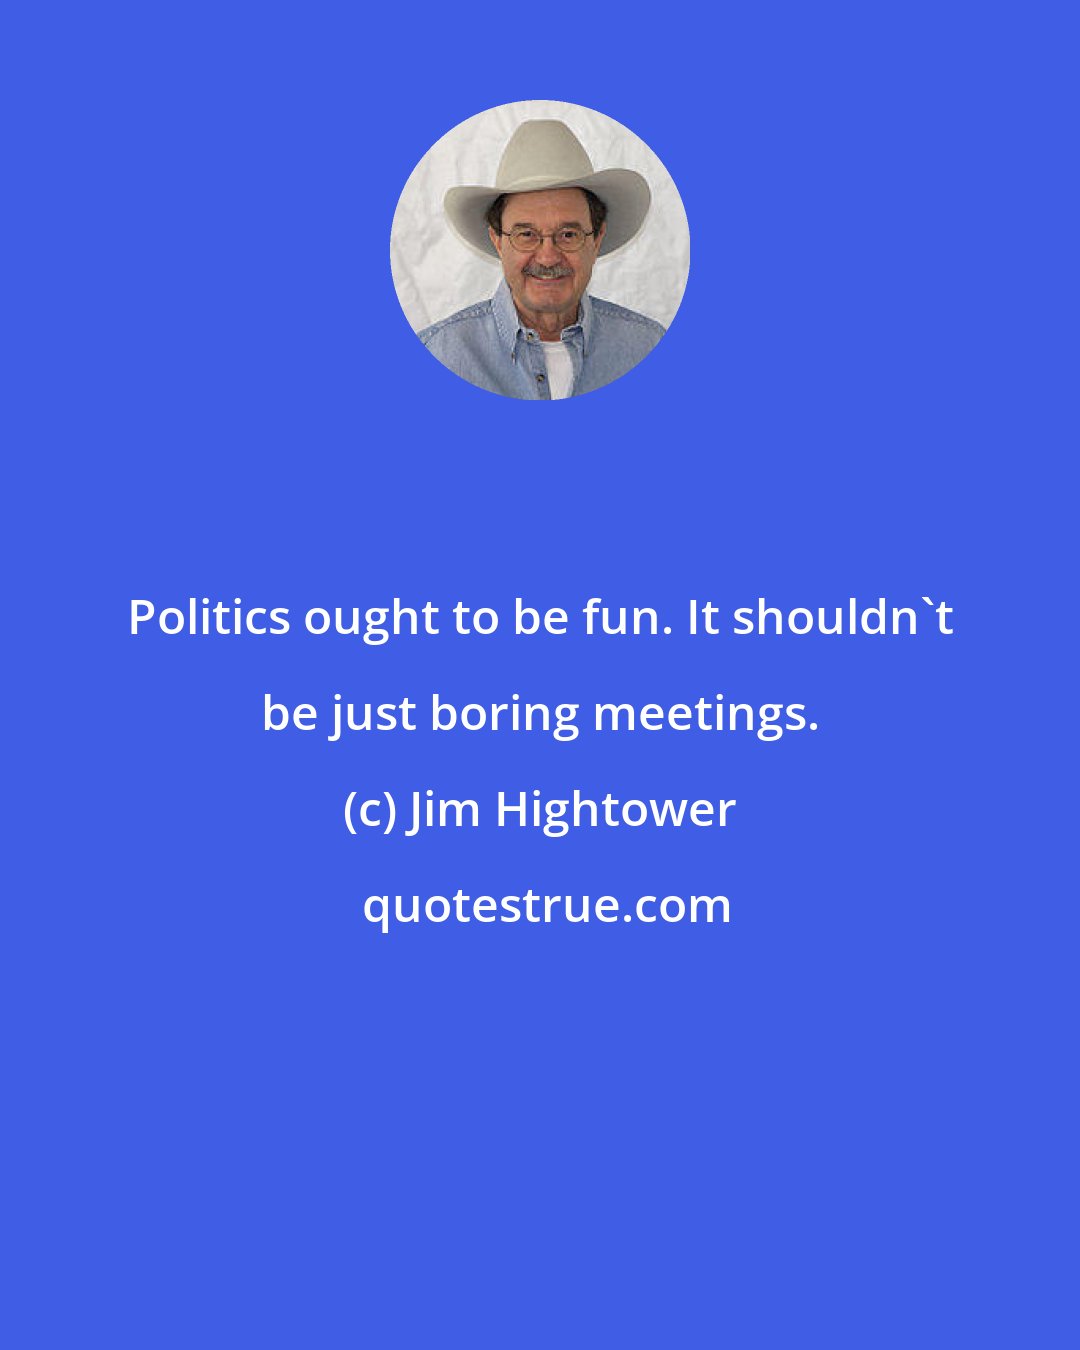 Jim Hightower: Politics ought to be fun. It shouldn't be just boring meetings.